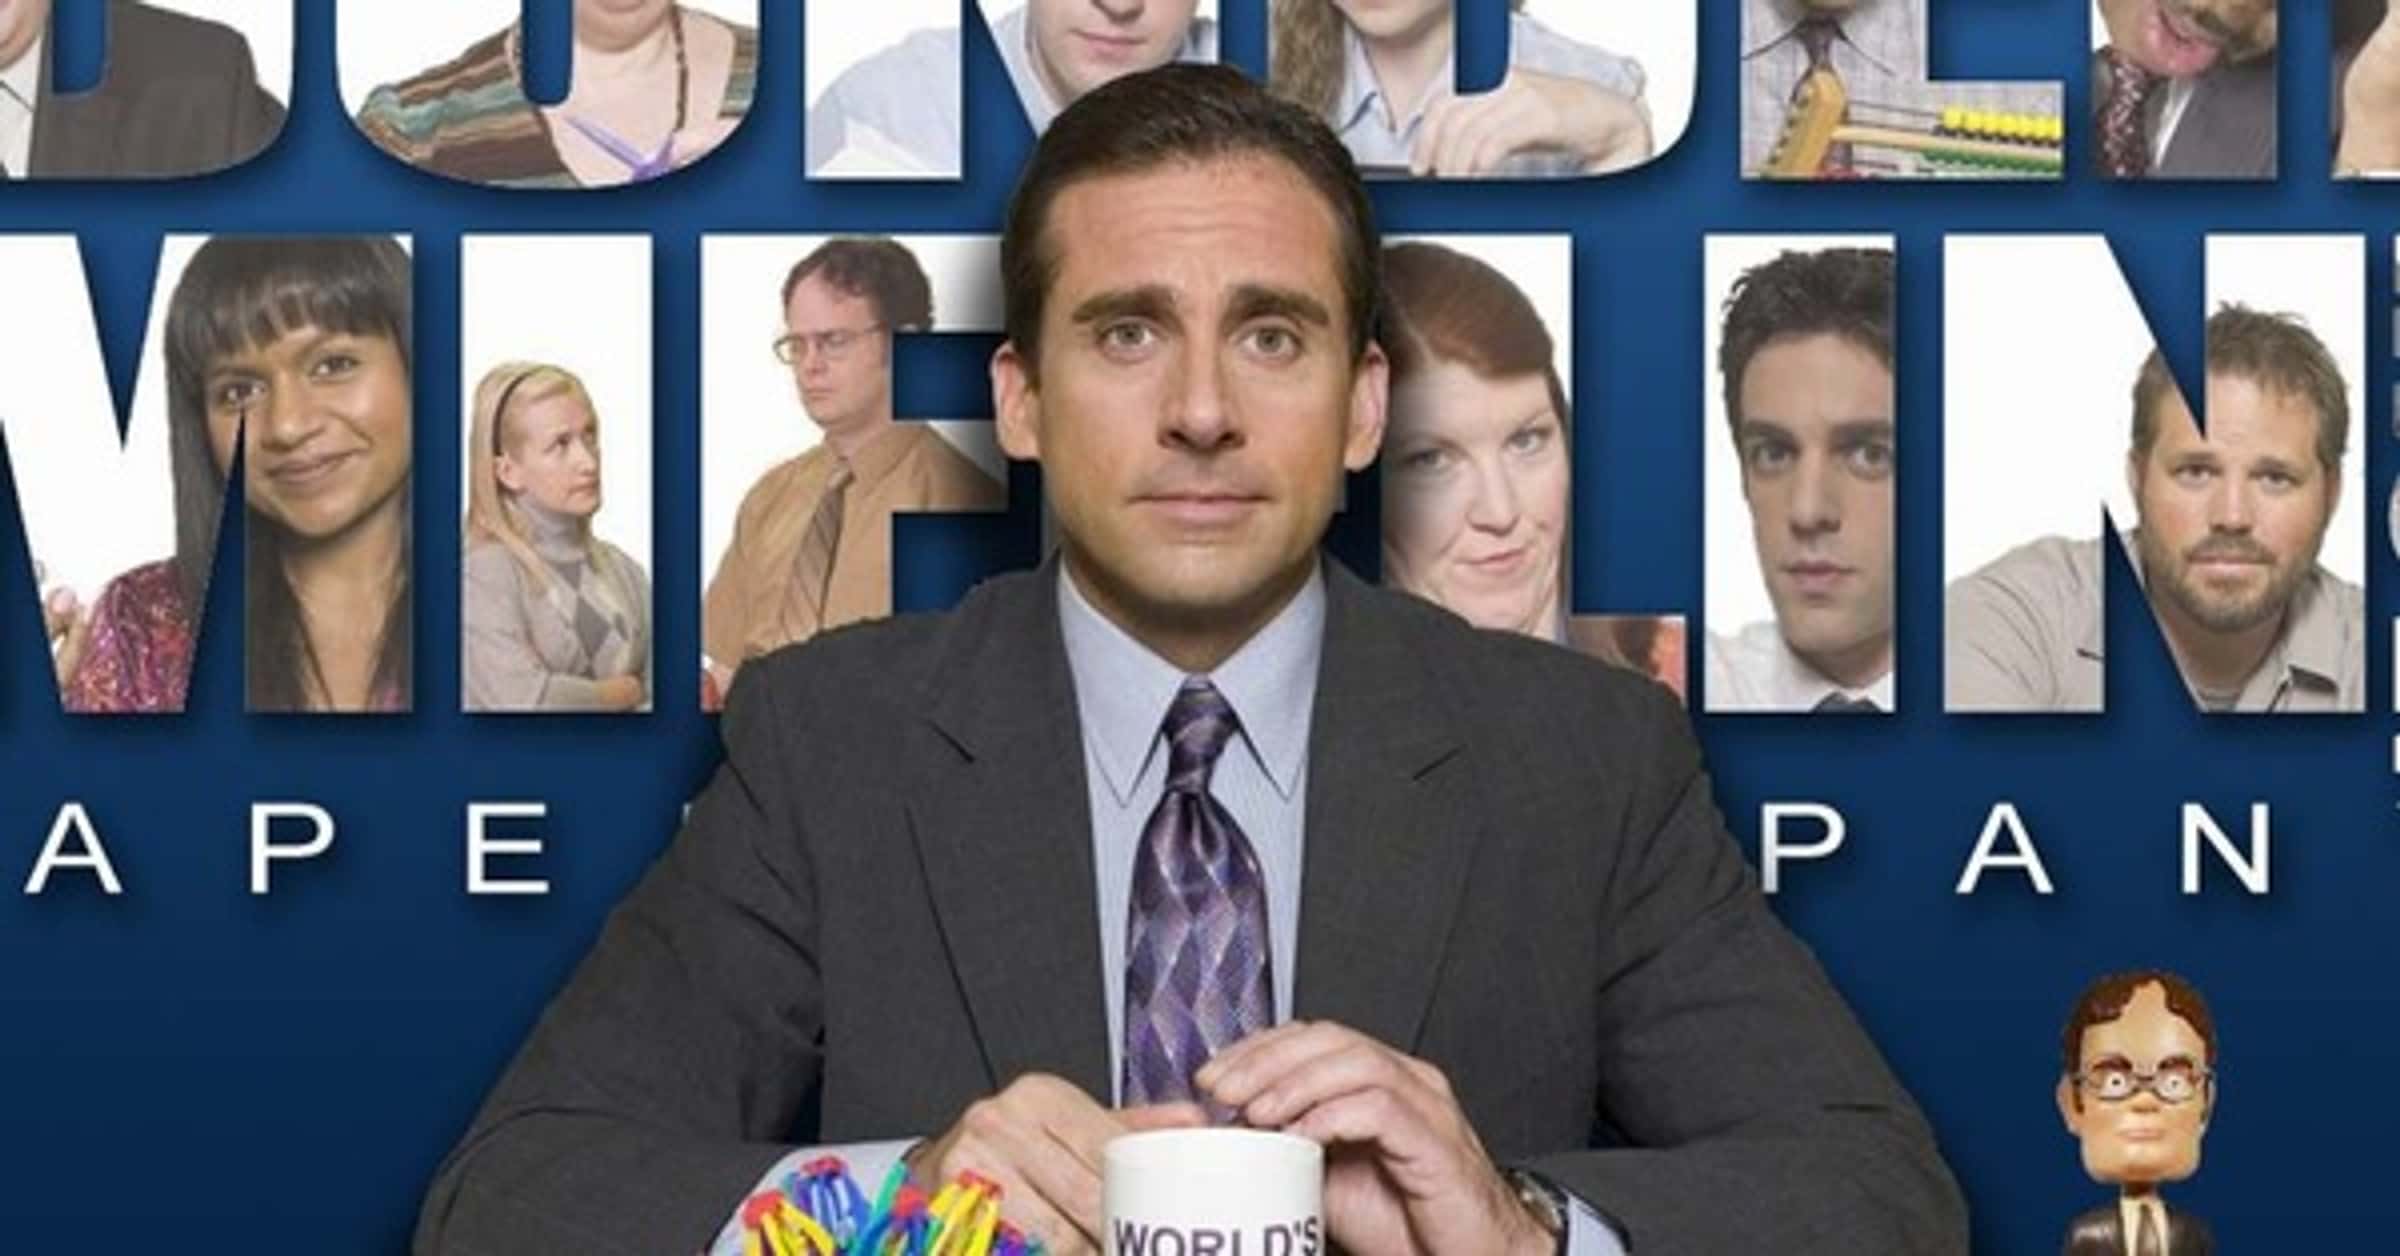 Best Season of The Office | List of All The Office Seasons Ranked